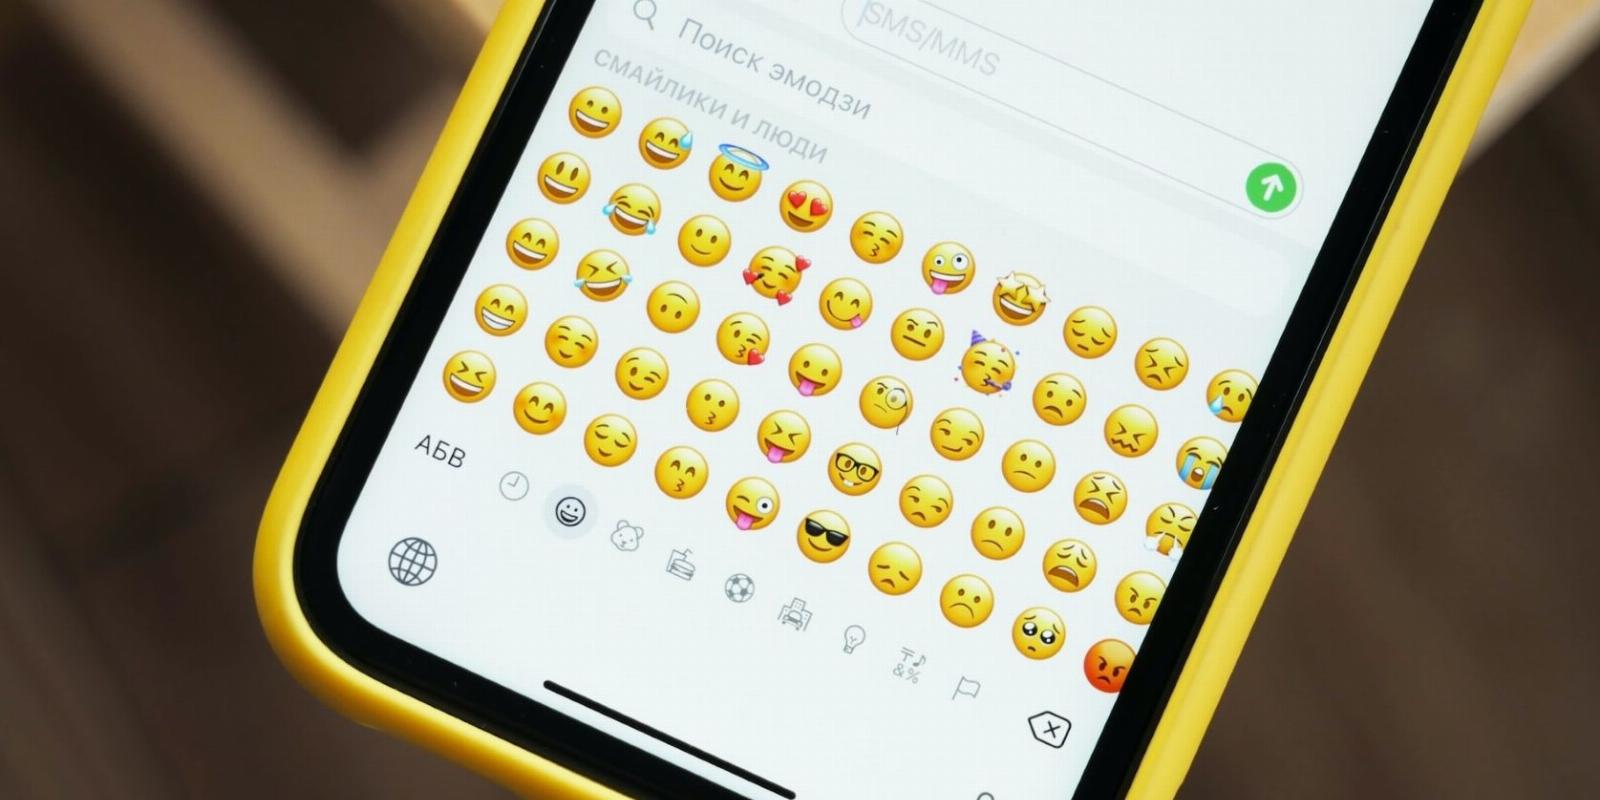 Why the OBJ Box Replaces Emojis and How to Fix It